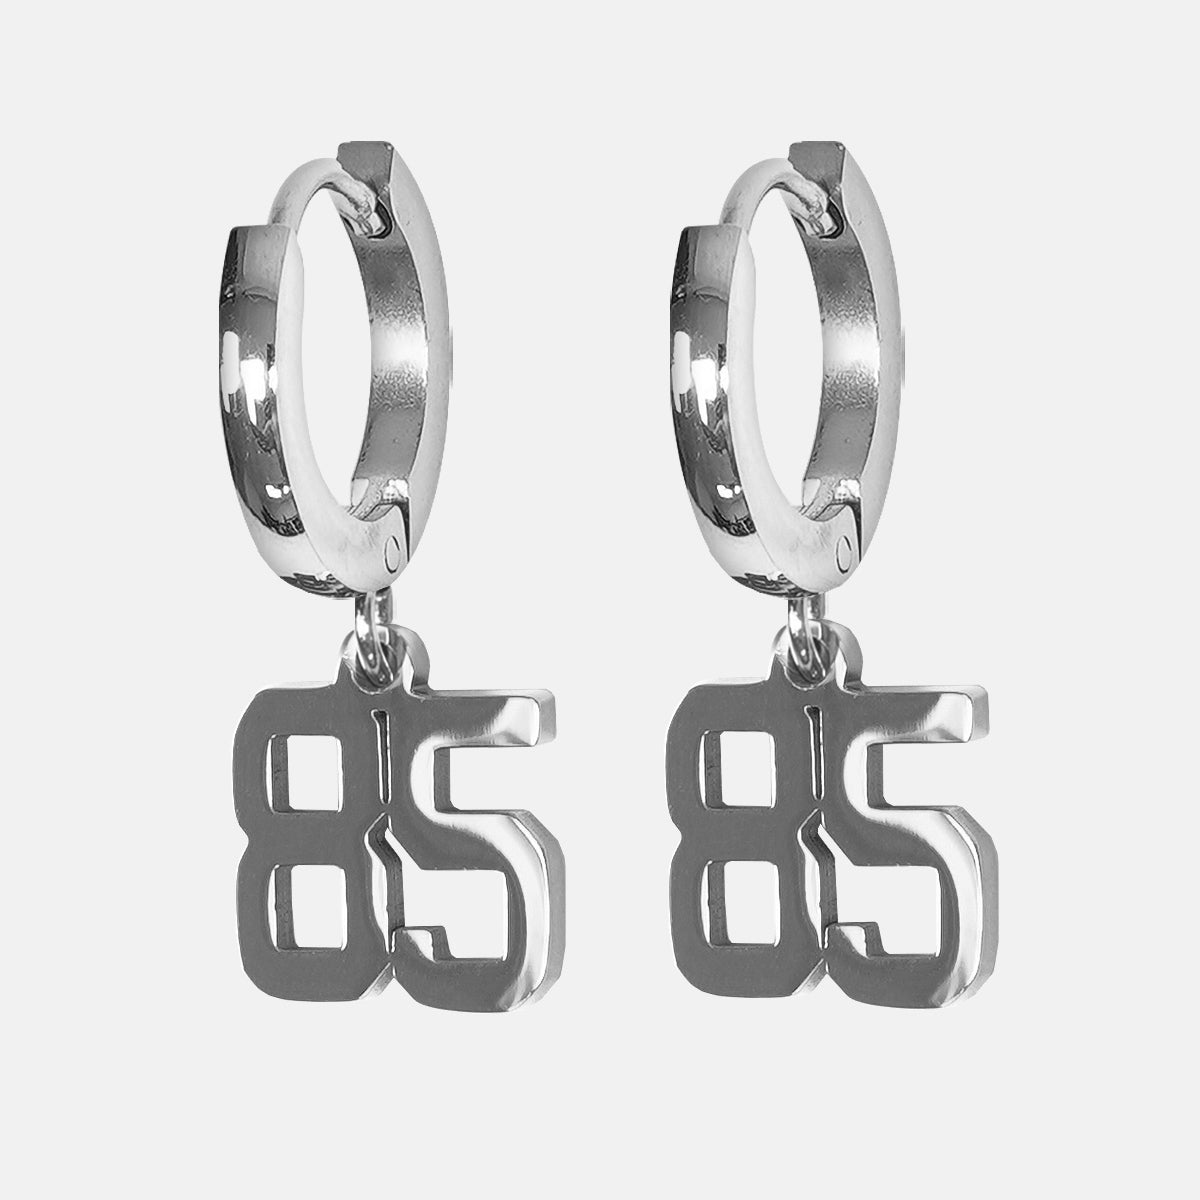 85 Number Earring - Stainless Steel